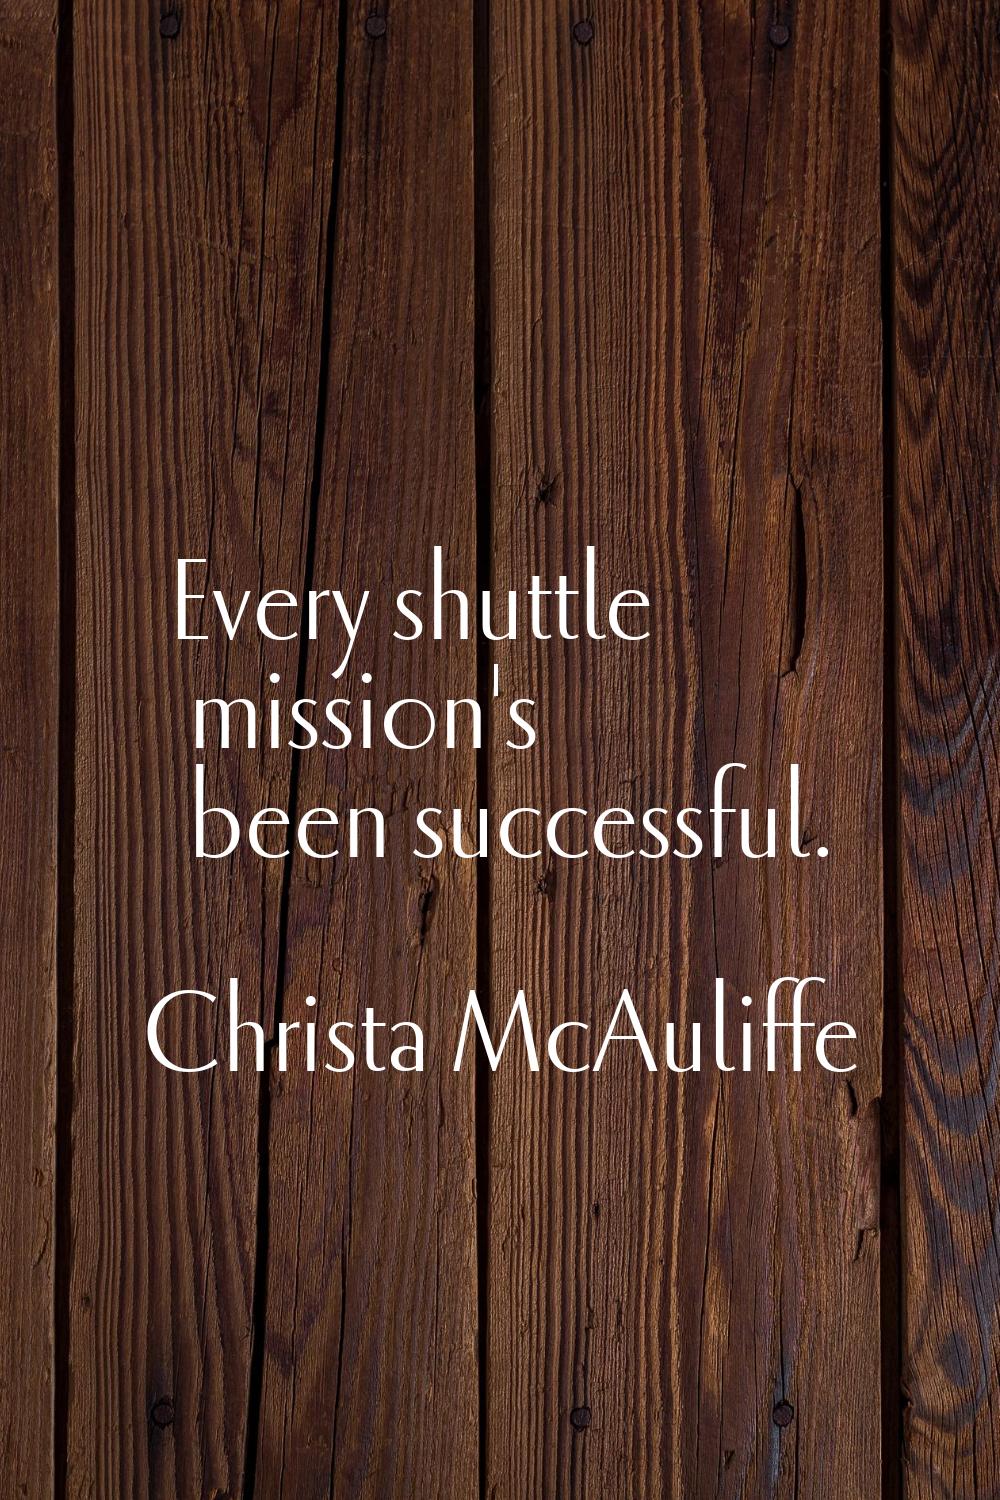 Every shuttle mission's been successful.